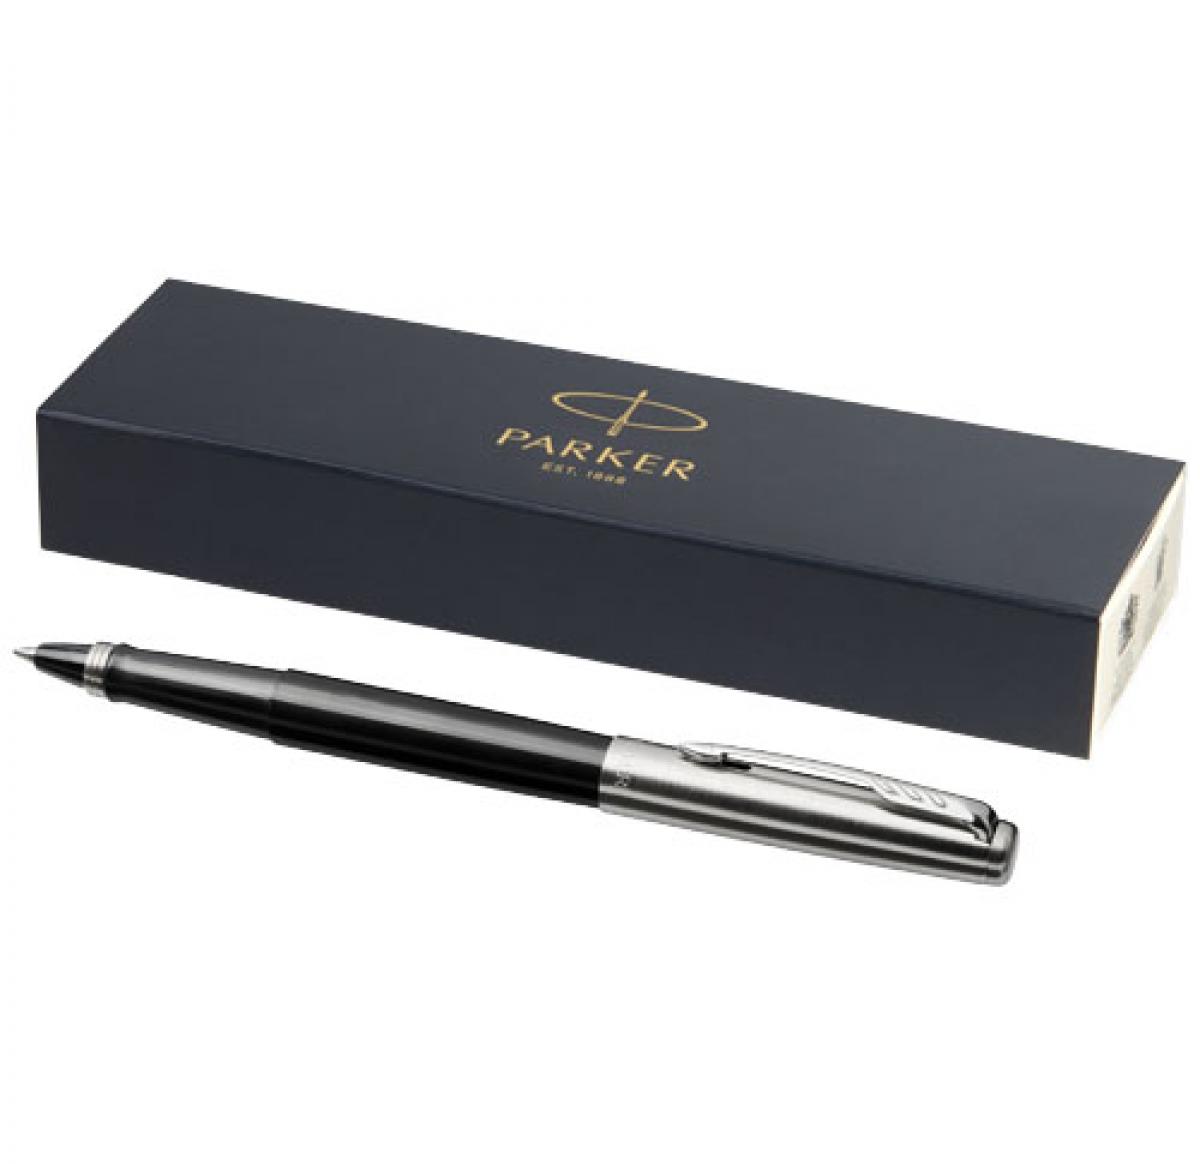 Parker Jotter plastic with stainless steel rollerbal pen